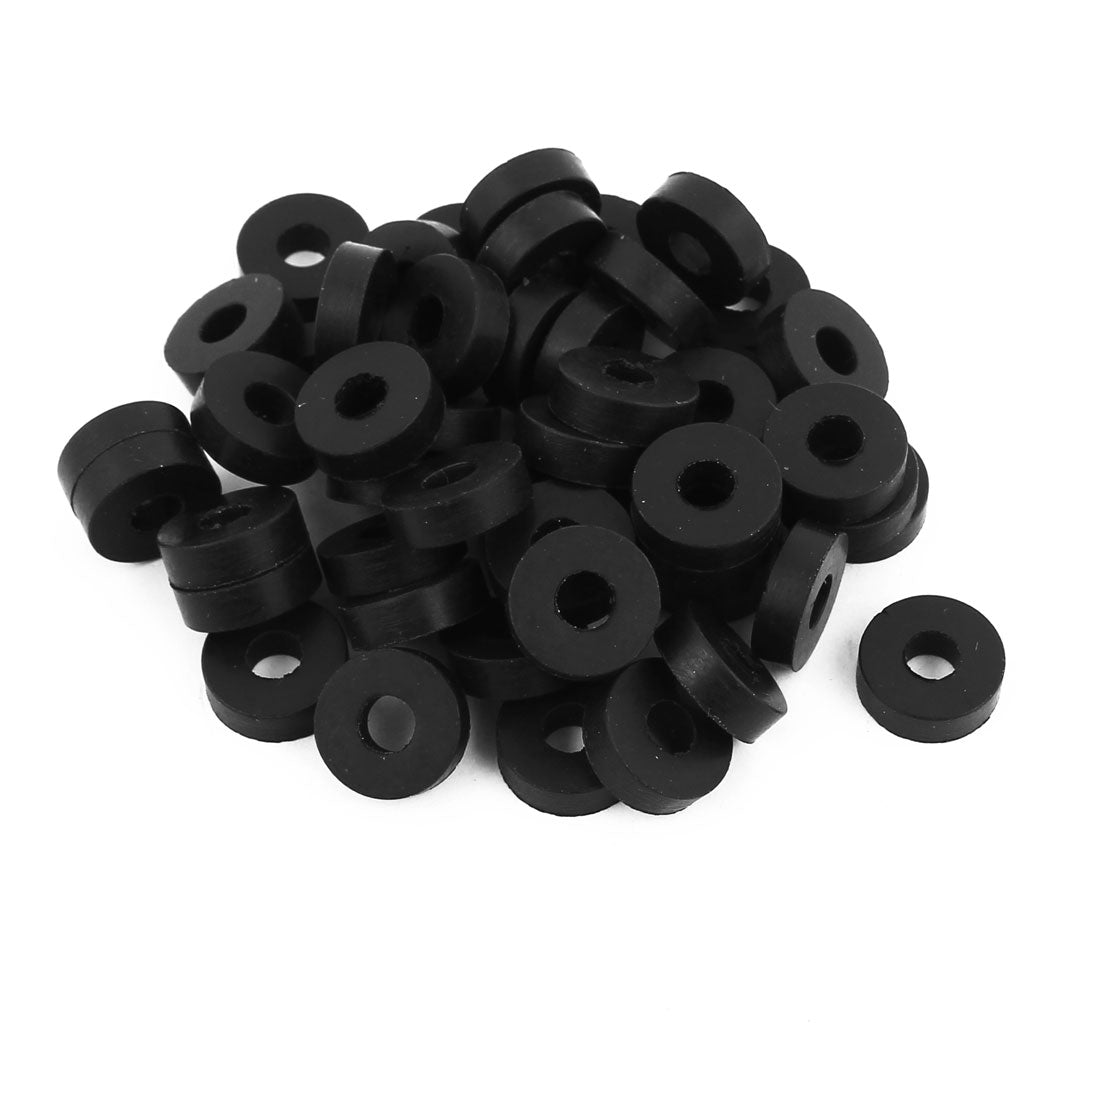 uxcell Uxcell OD ID O-Ring Hose Gasket Flat Rubber Washers Grommet Pack of 50